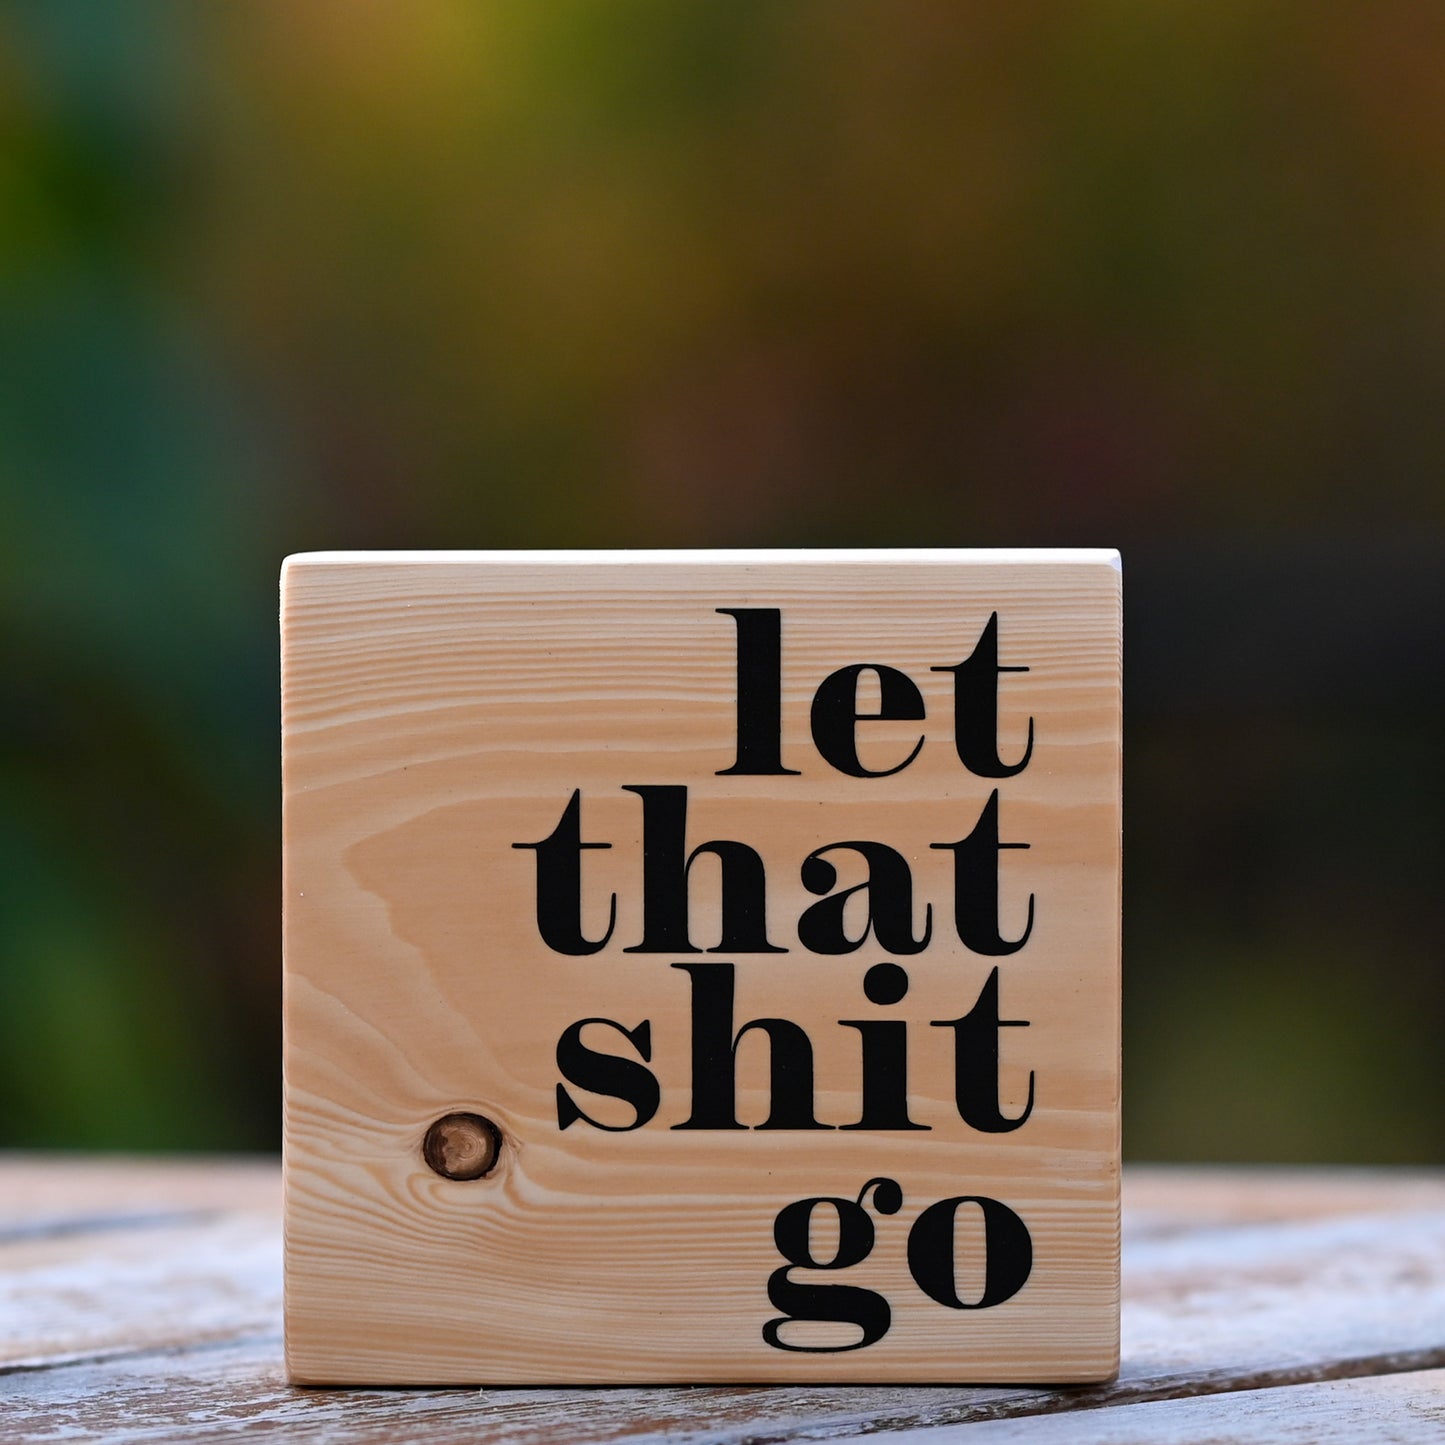 let that shit go ~ wood sign block